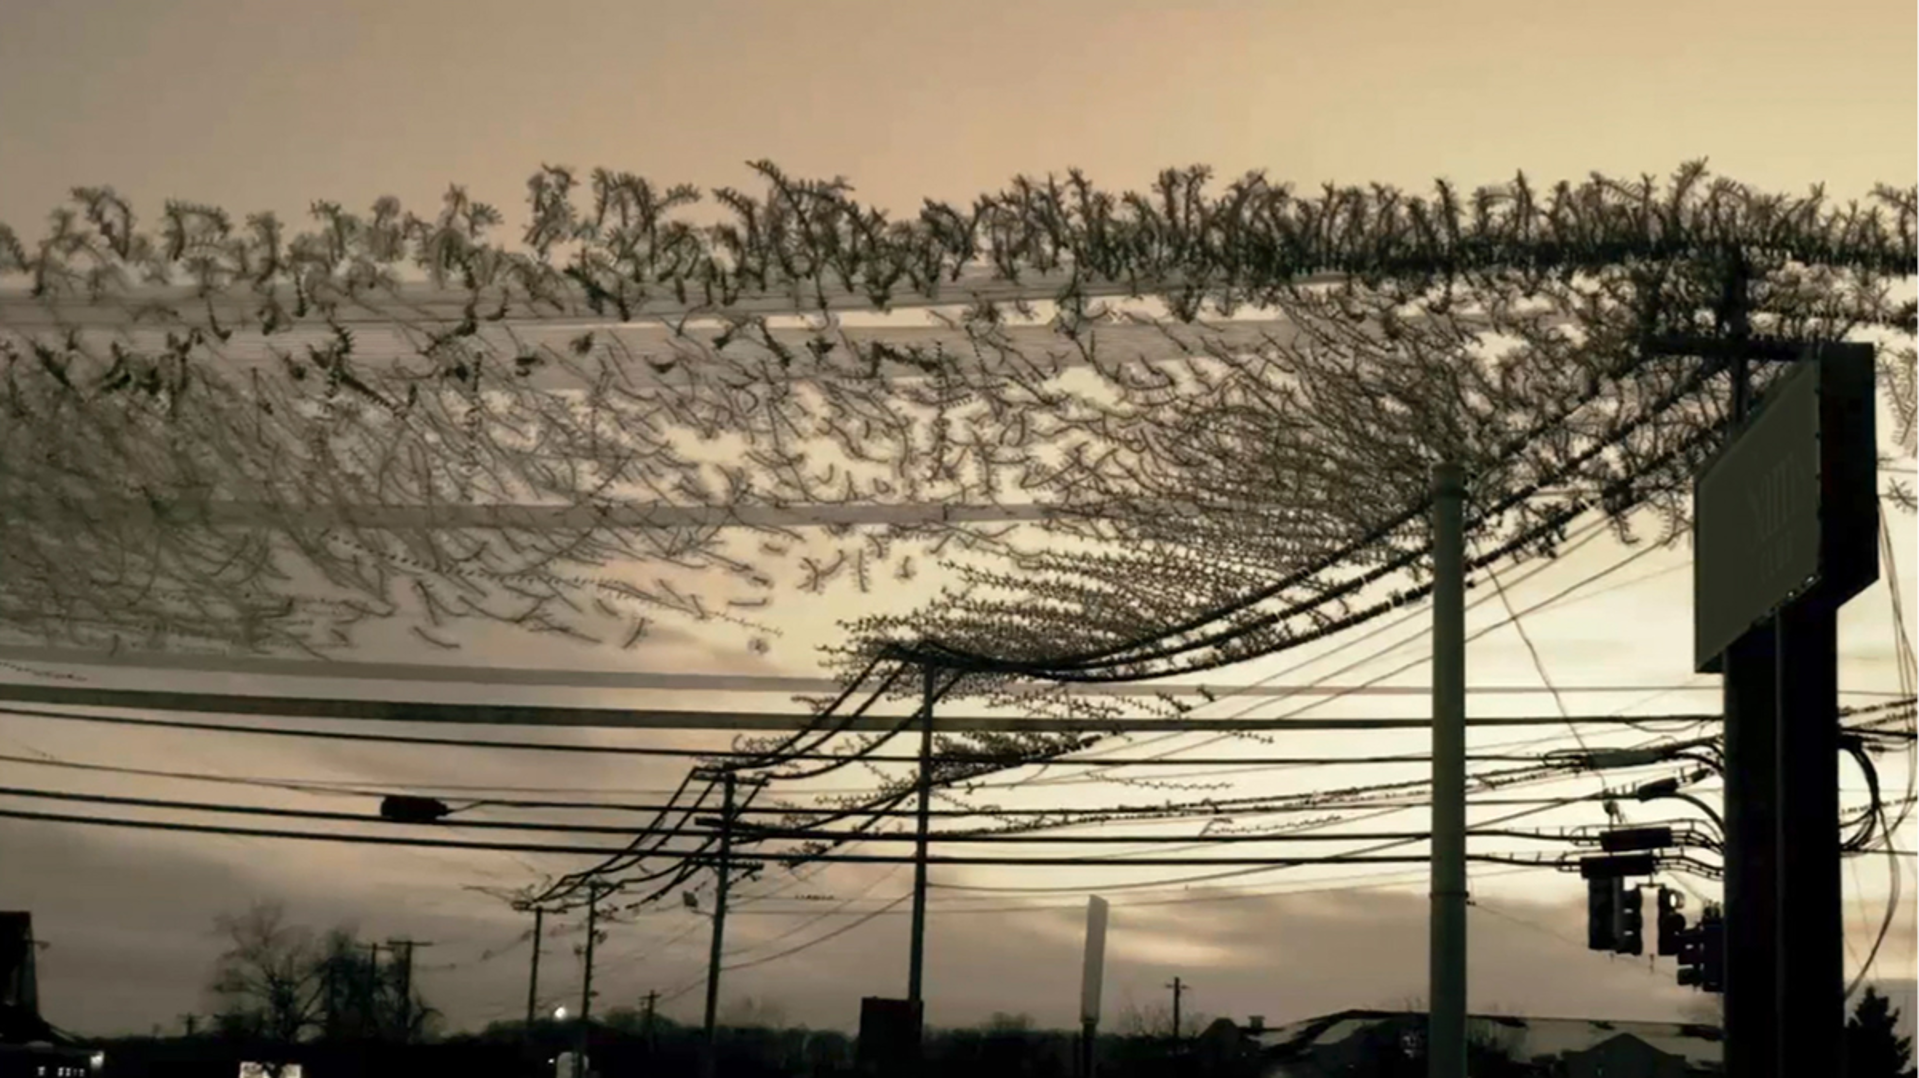 Starlings Decide to Change Lines by Dennis Hlynsky